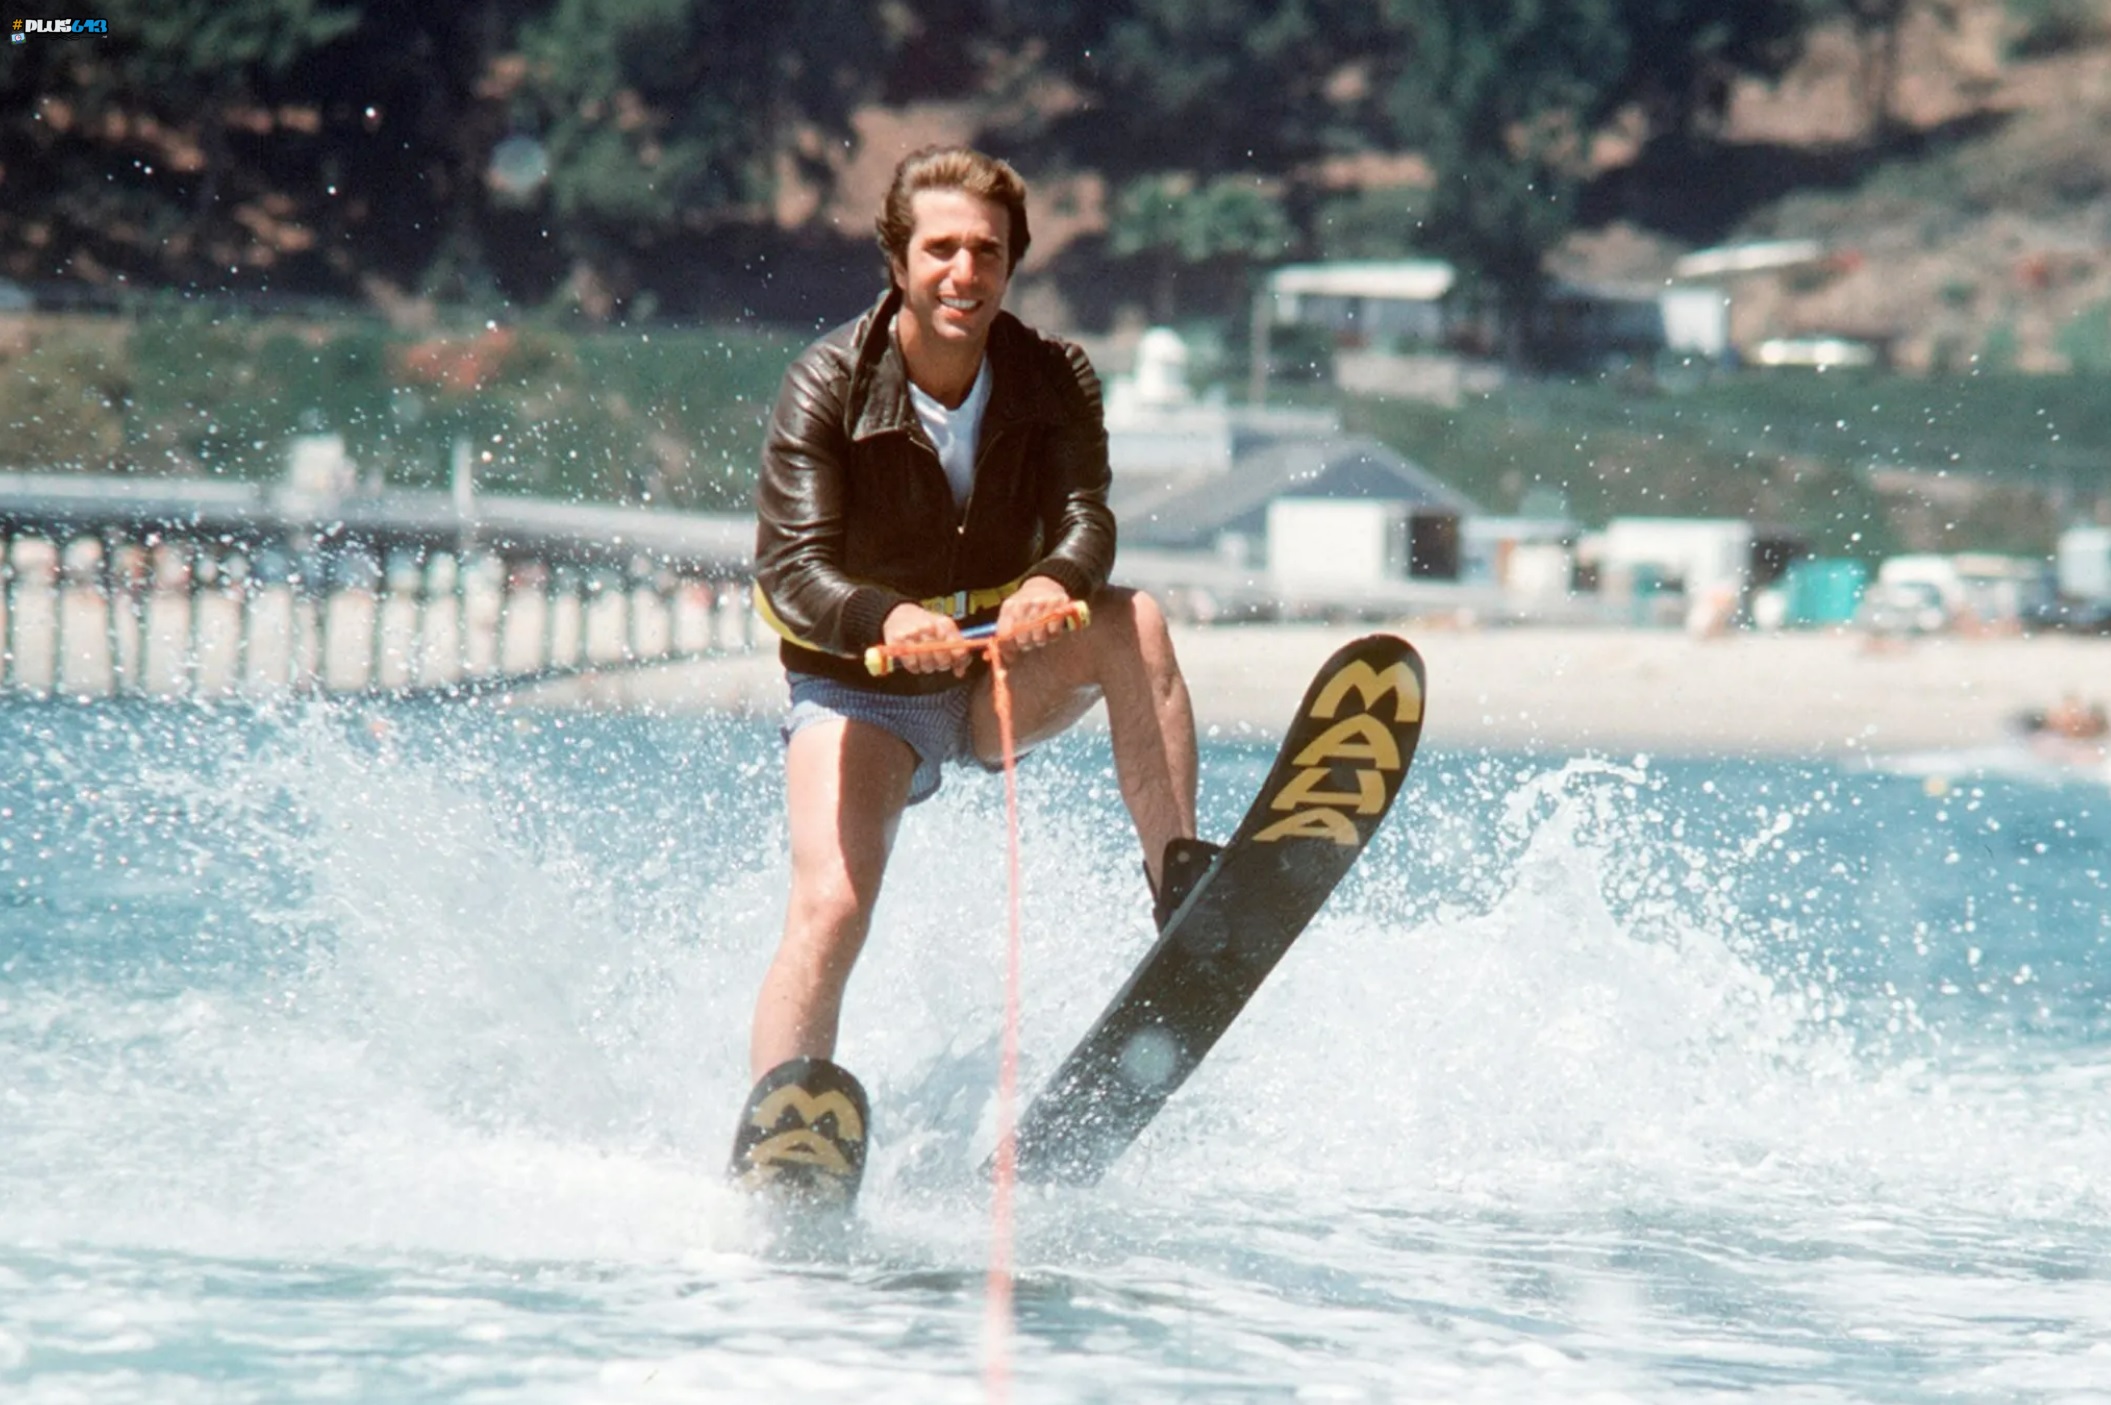 WATCH OUT FOR THE SHARK FONZ!